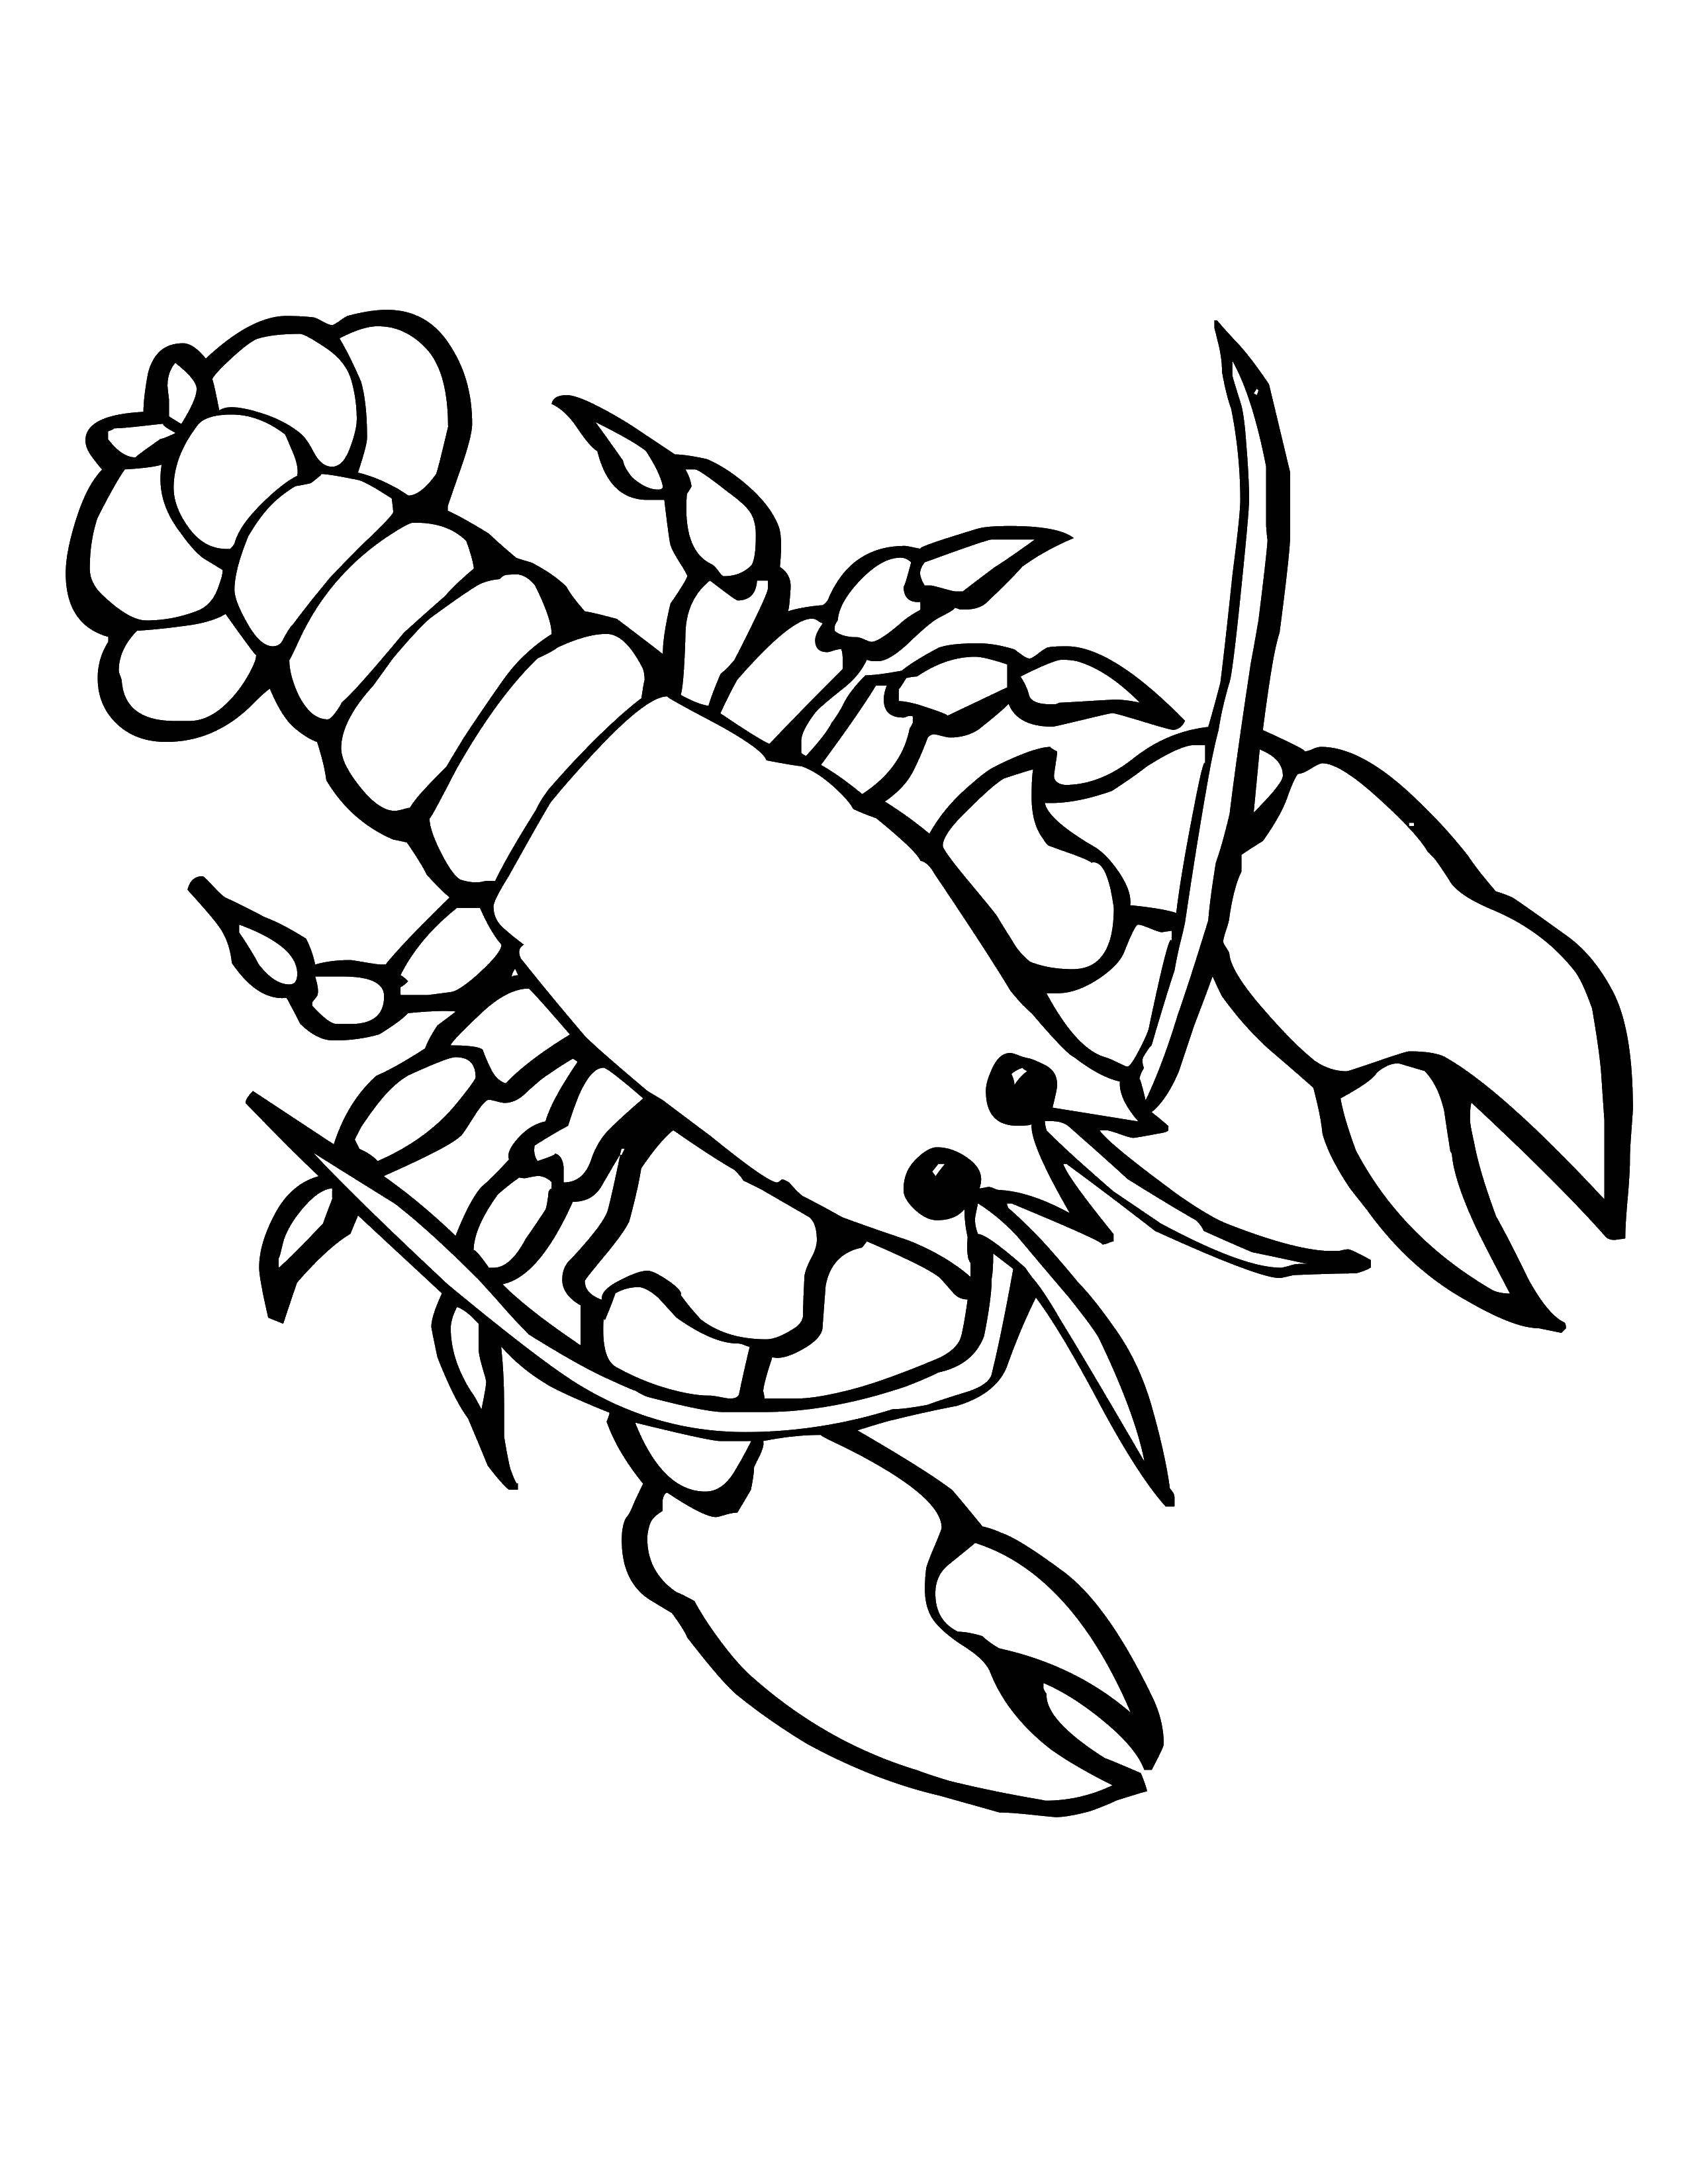 Coloring Lobster. Category animals. Tags:  the lobster claws, tail.